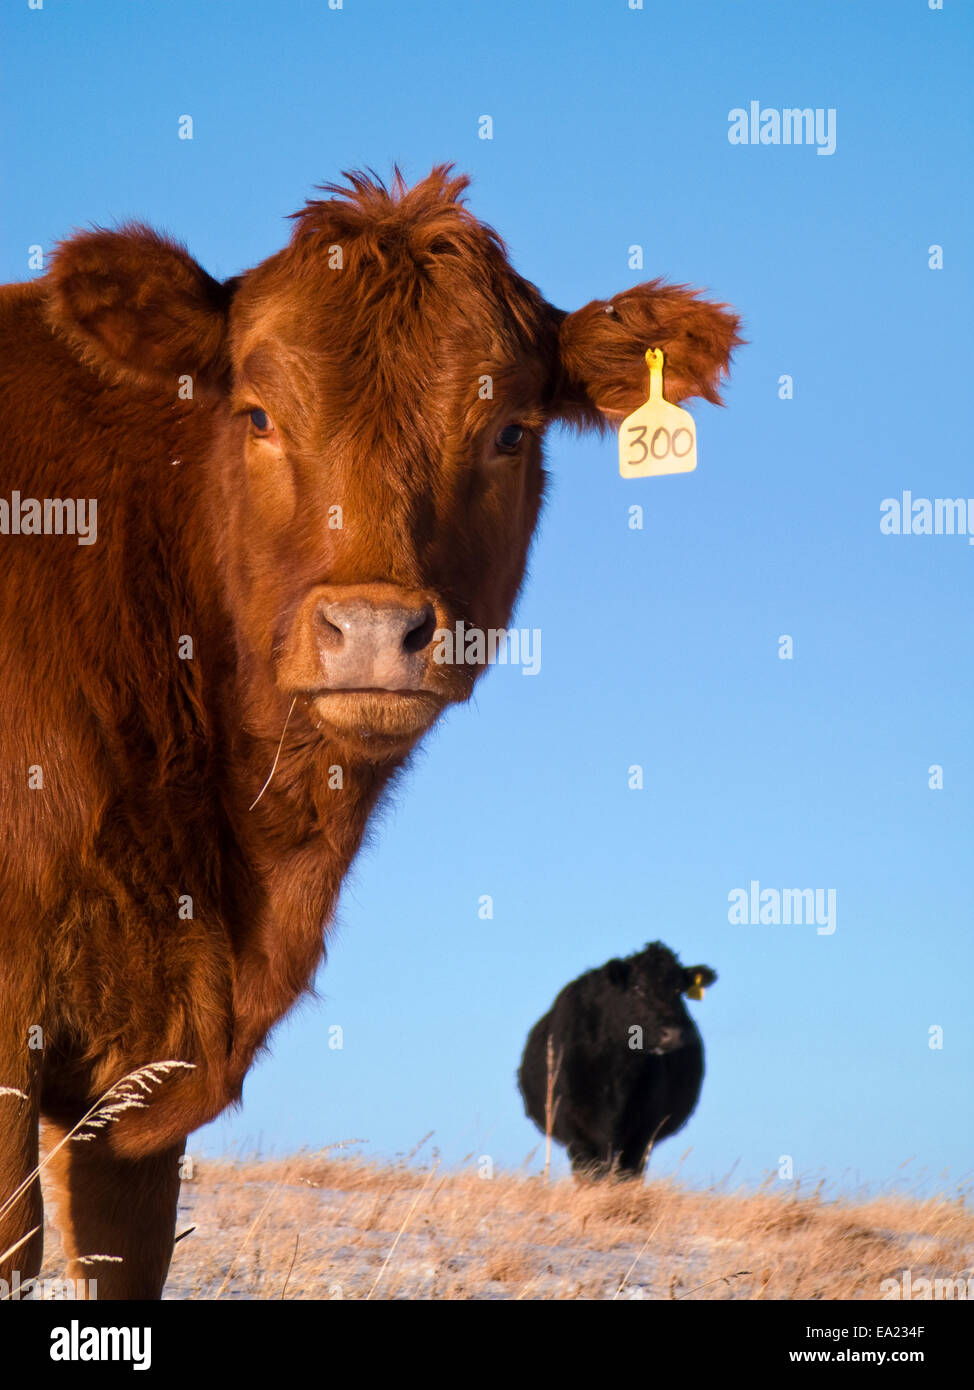 Sam,Ag,Agriculture,Livestock,Cow,Cows,Cattle Stock Photo